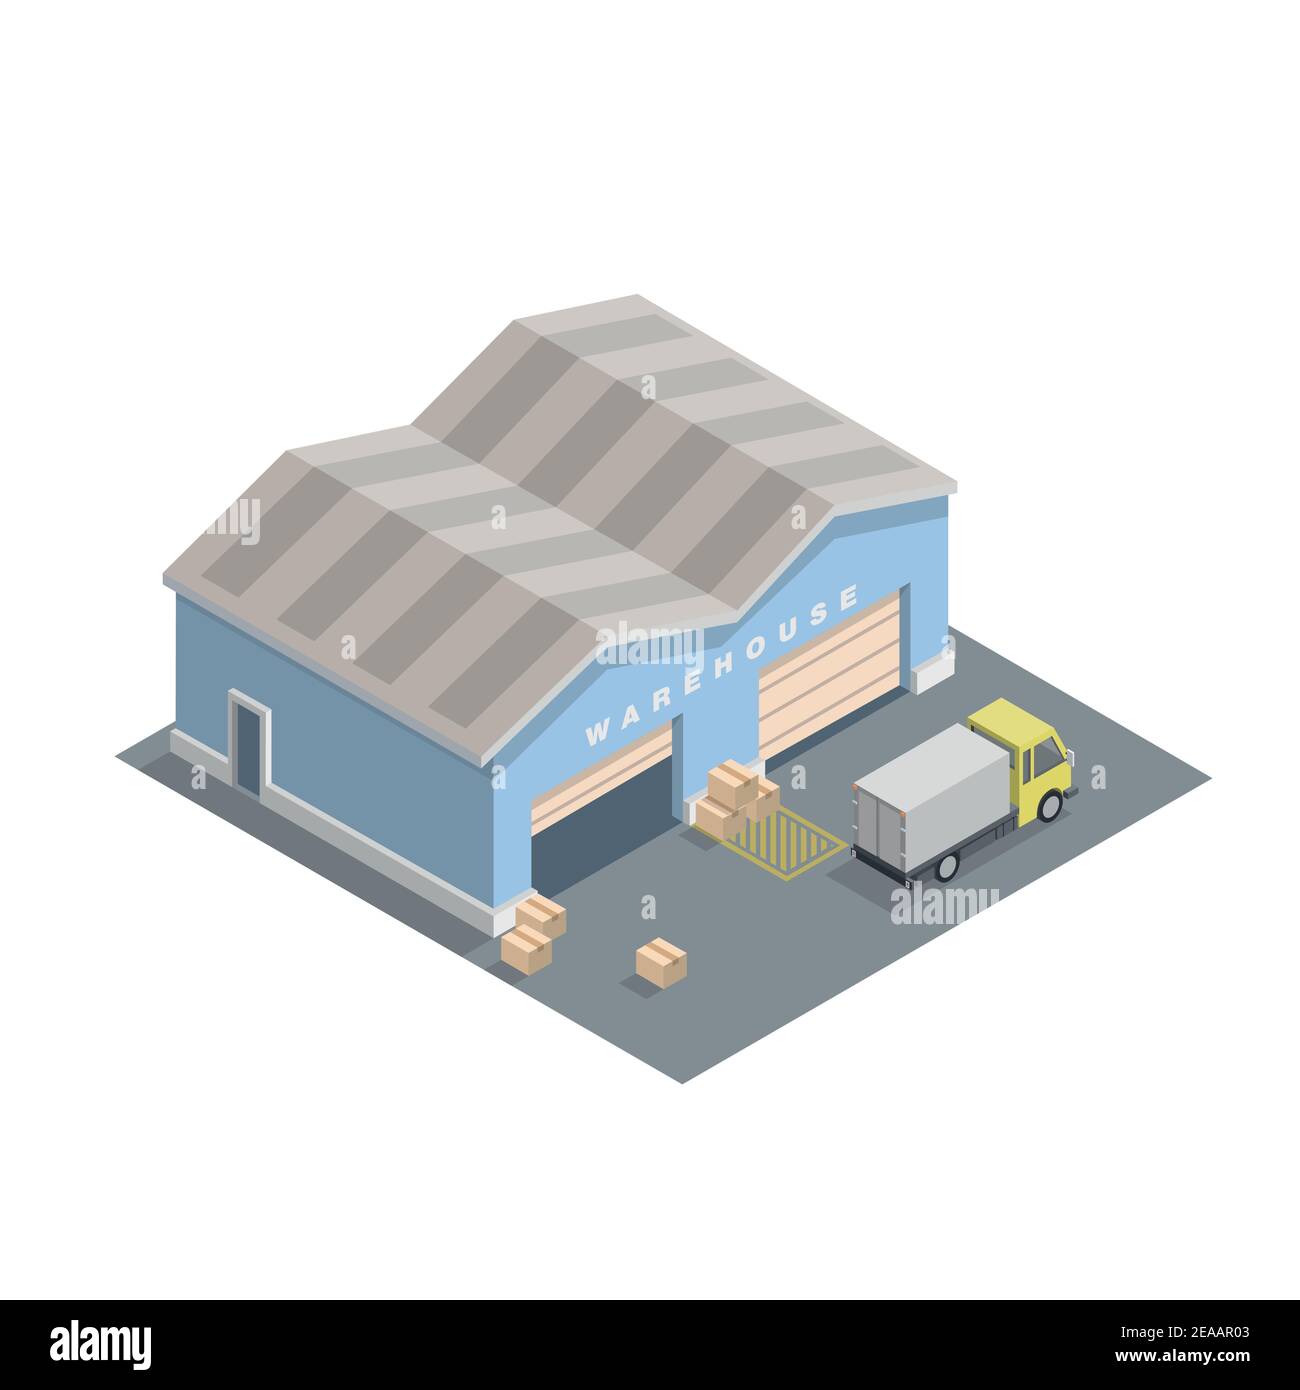 Vector isometric illustration of warehouse building with cargo car and boxes. Warehouse exterior. Warehouse web. Logistic storage. Stock Vector